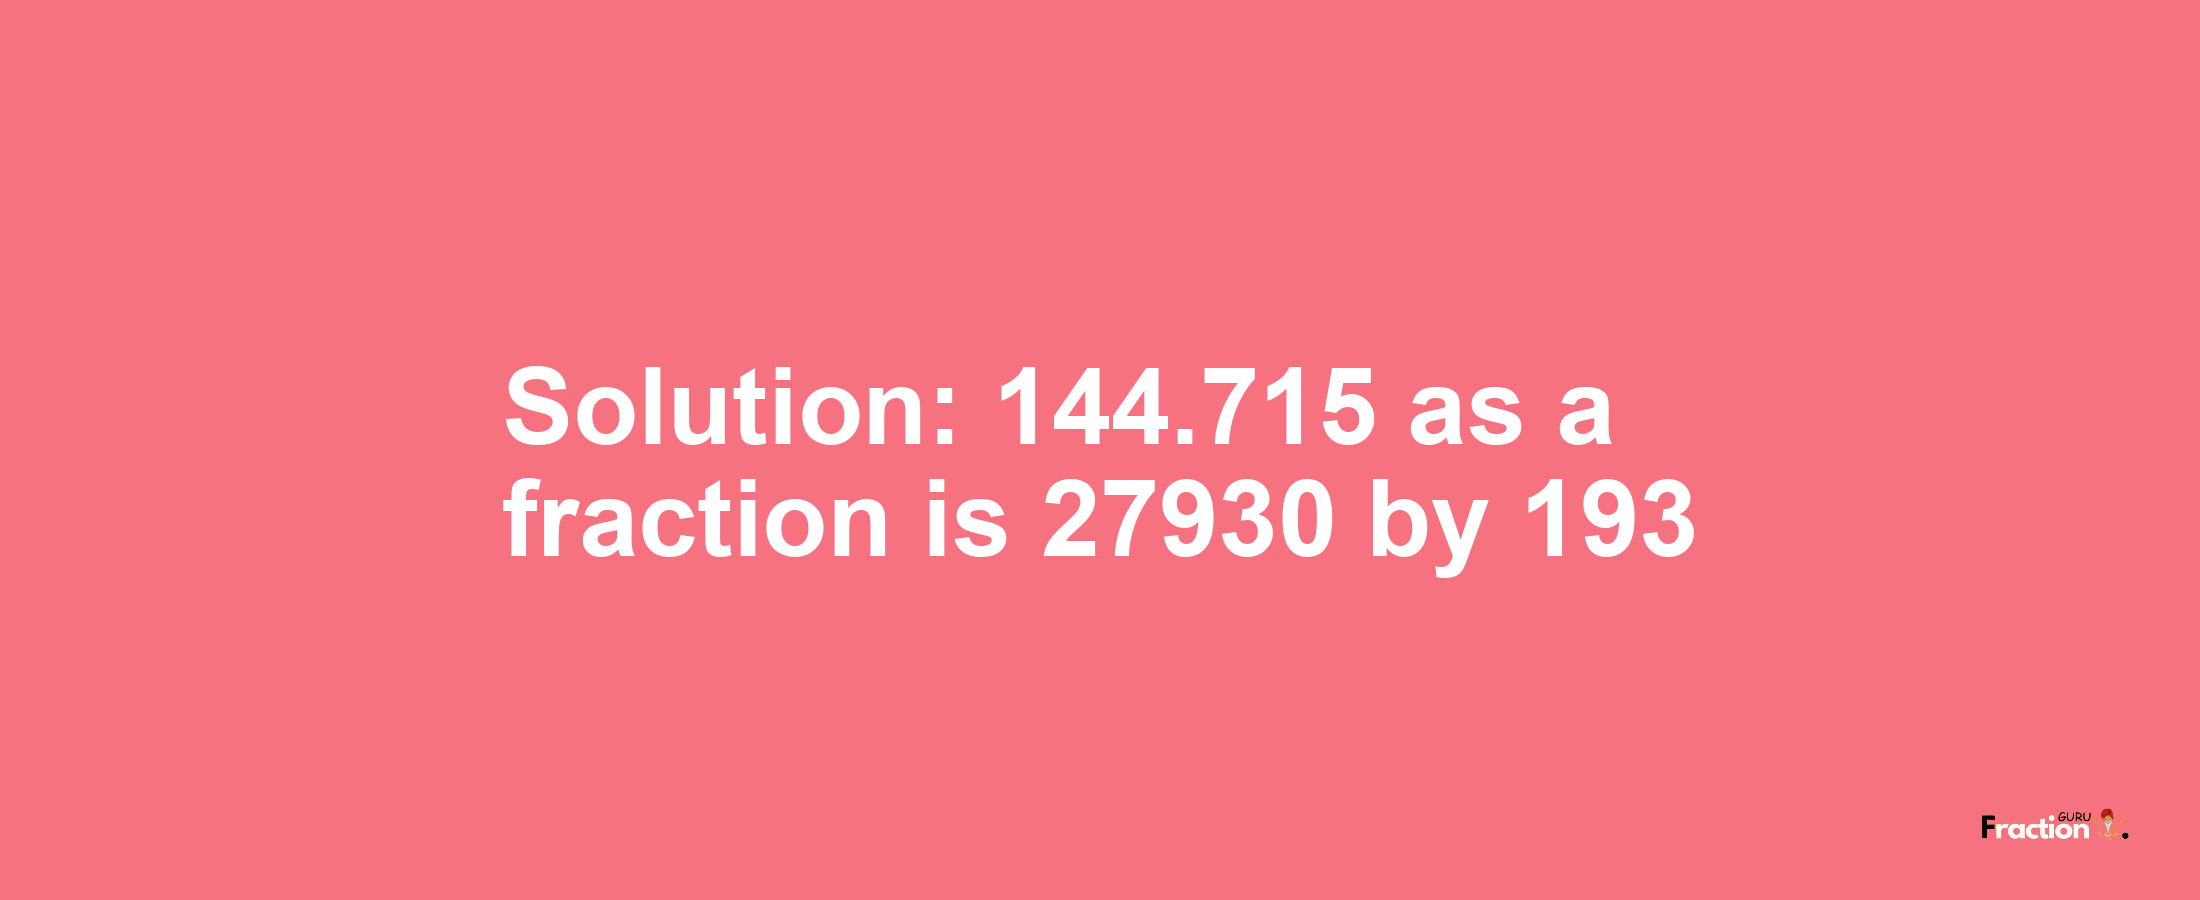 Solution:144.715 as a fraction is 27930/193